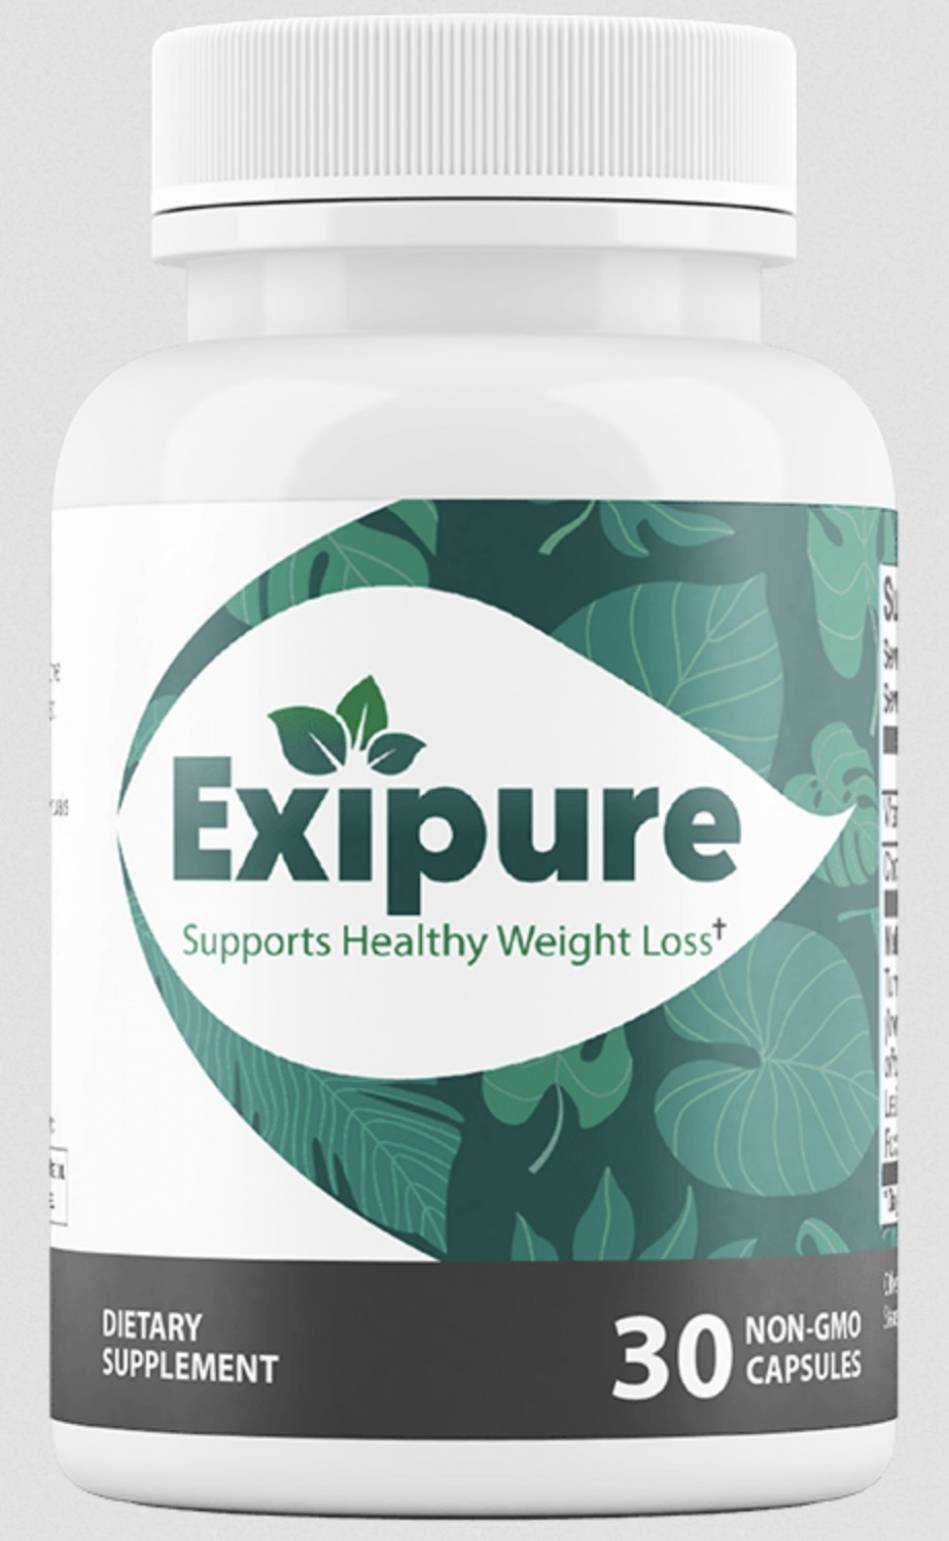 Exipure Medical Review